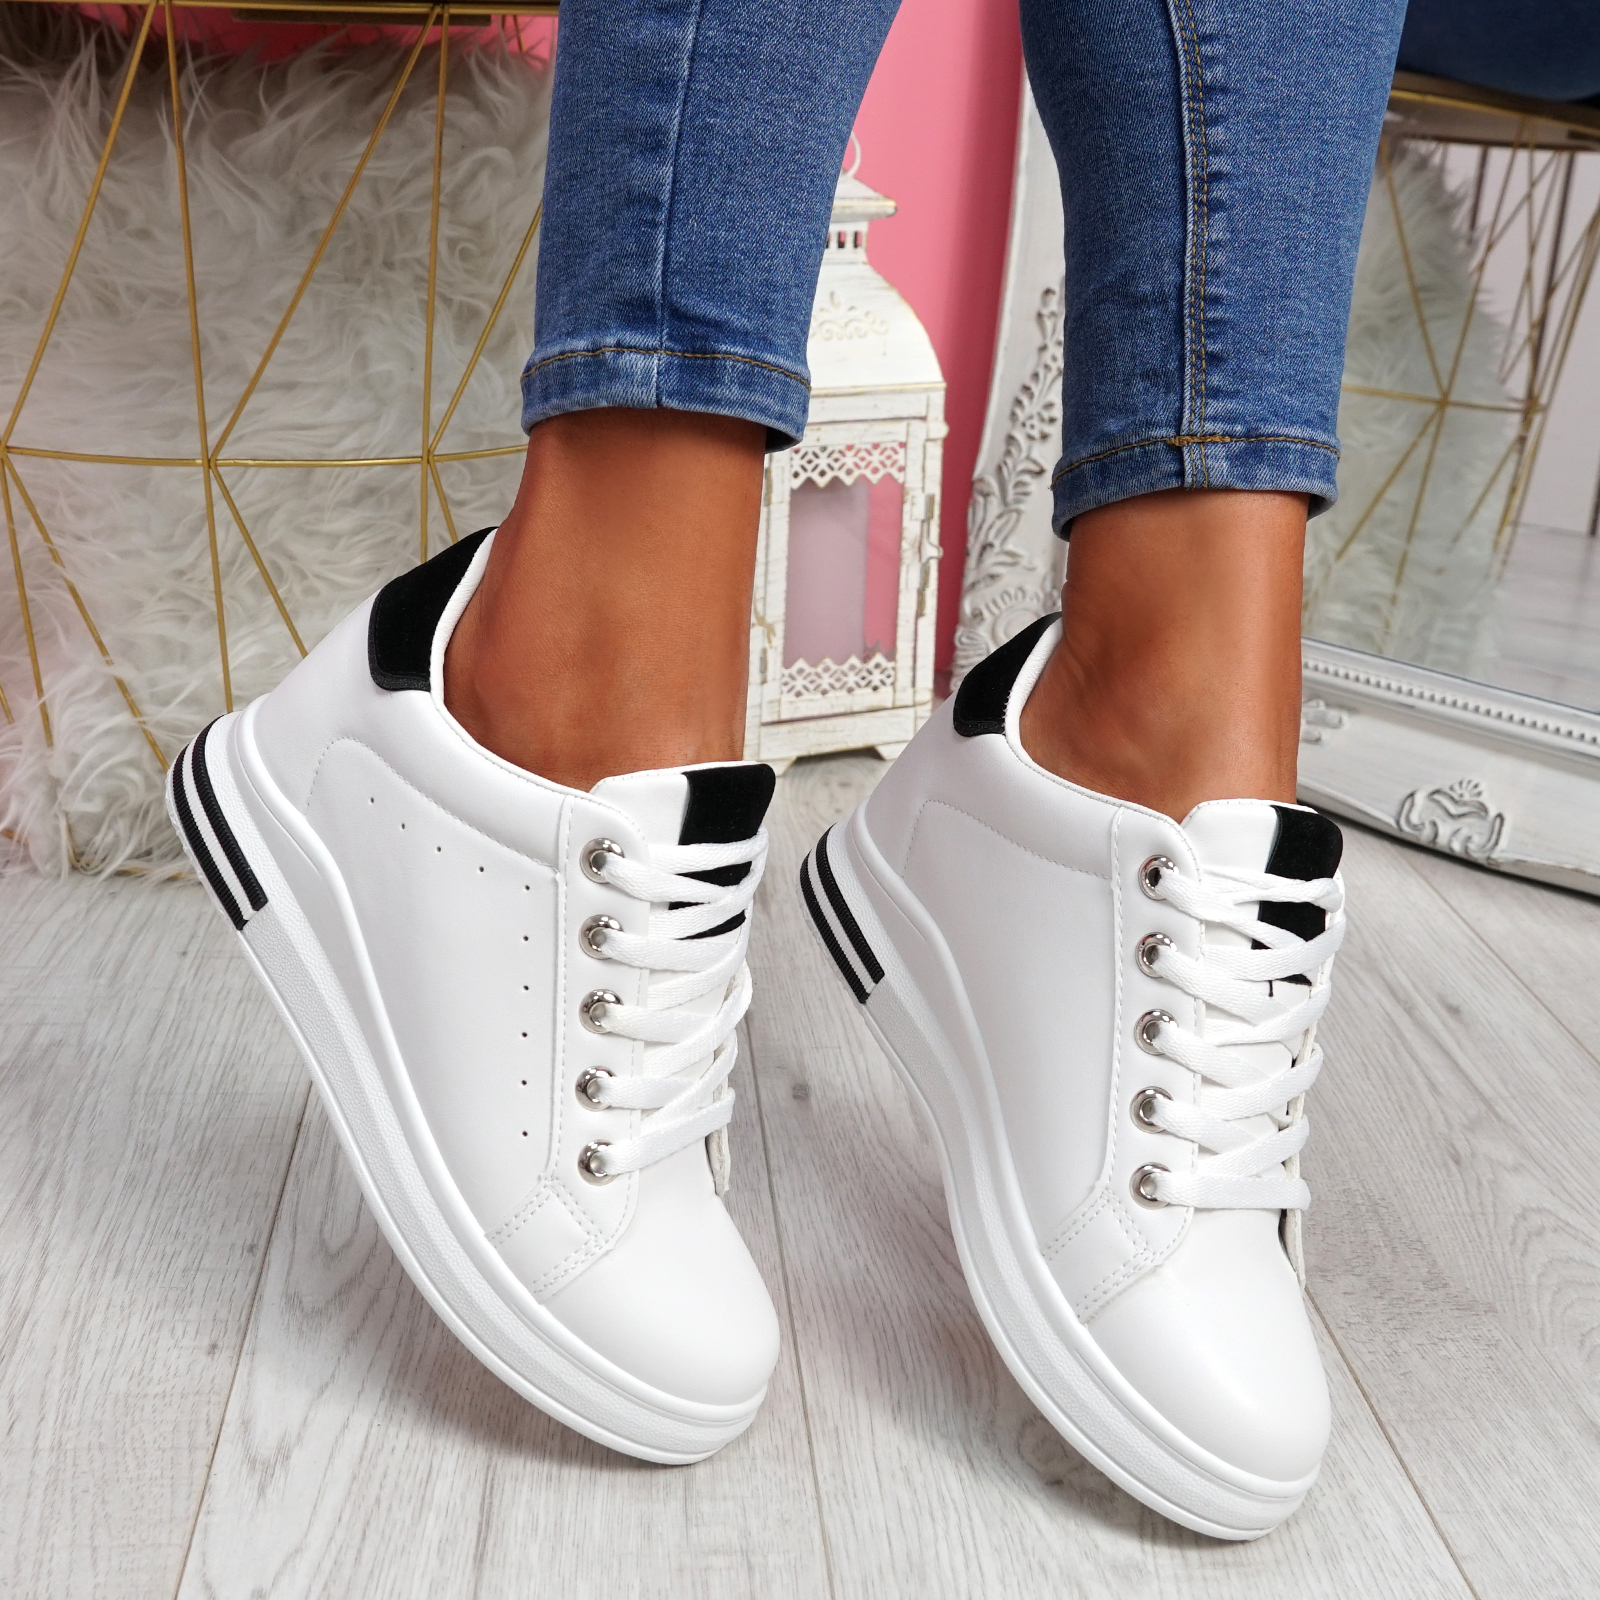 WOMENS LADIES WEDGE TRAINERS LACE UP SLIP ON PARTY SNEAKERS WOMEN SHOES ...